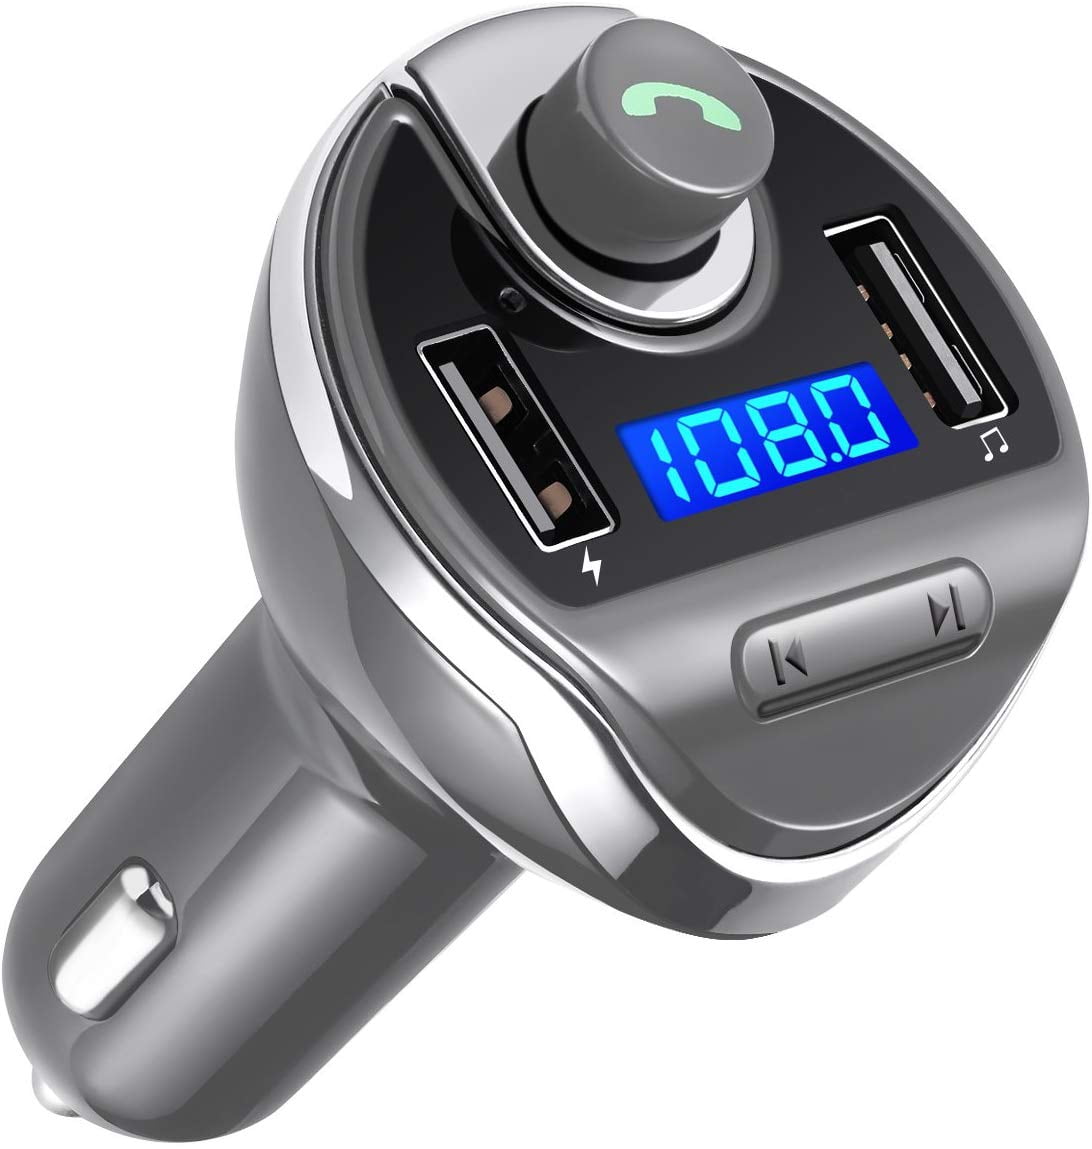 Hands-Free Call ORIA Bluetooth FM Transmitter for Car with mic Inside,AUX Music Player,for Smartphones Wireless Bluetooth Radio Transmitter Car Adapter,Dual USB Charging Ports 